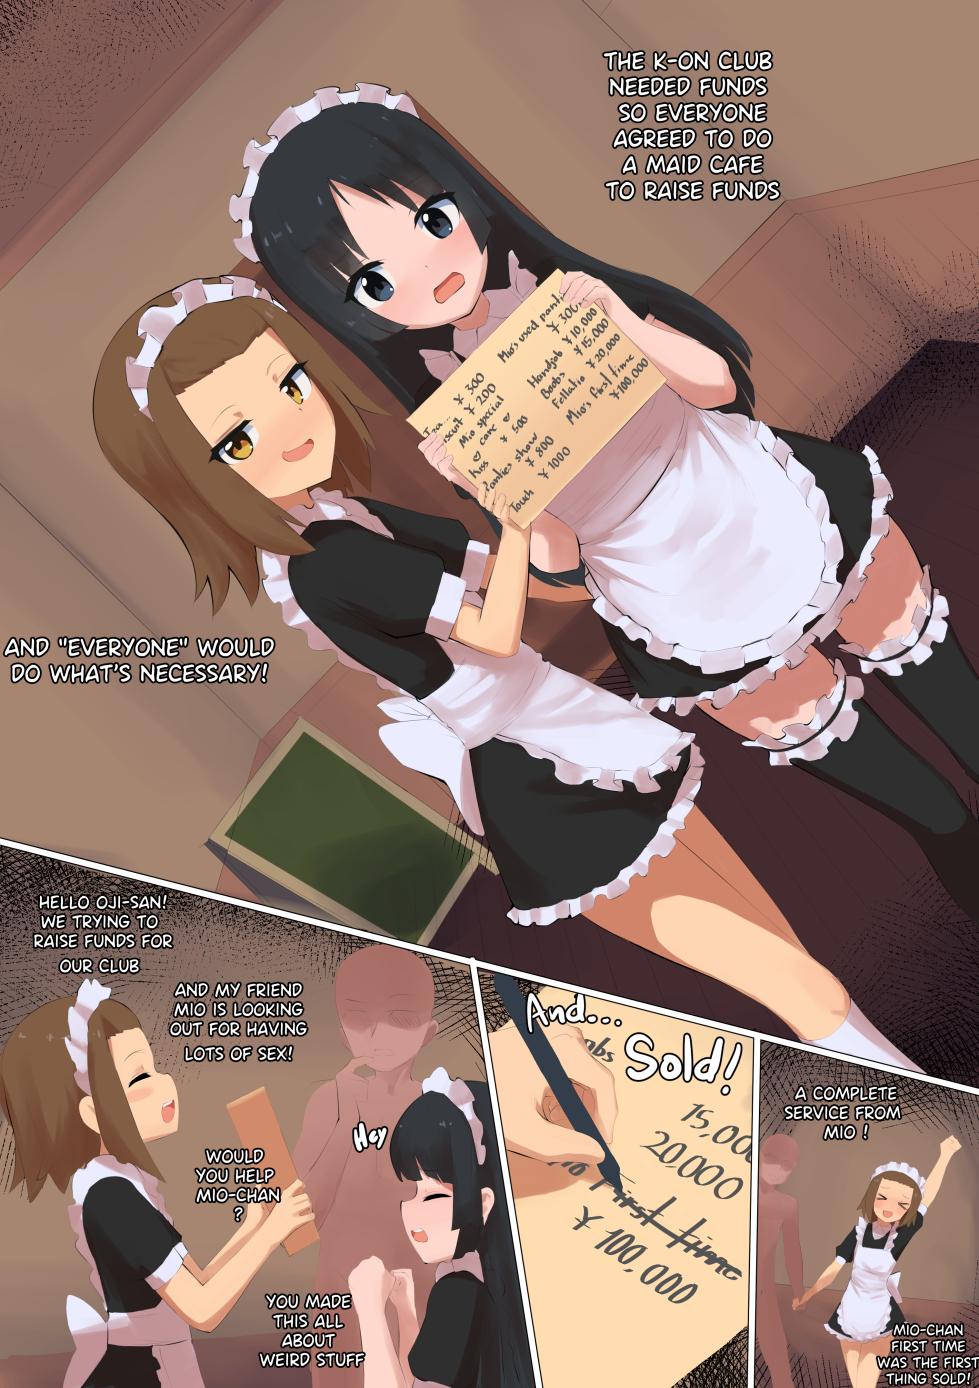 [reckless] Mio maid service + Maid Ritsu [fanbox] - Page 1